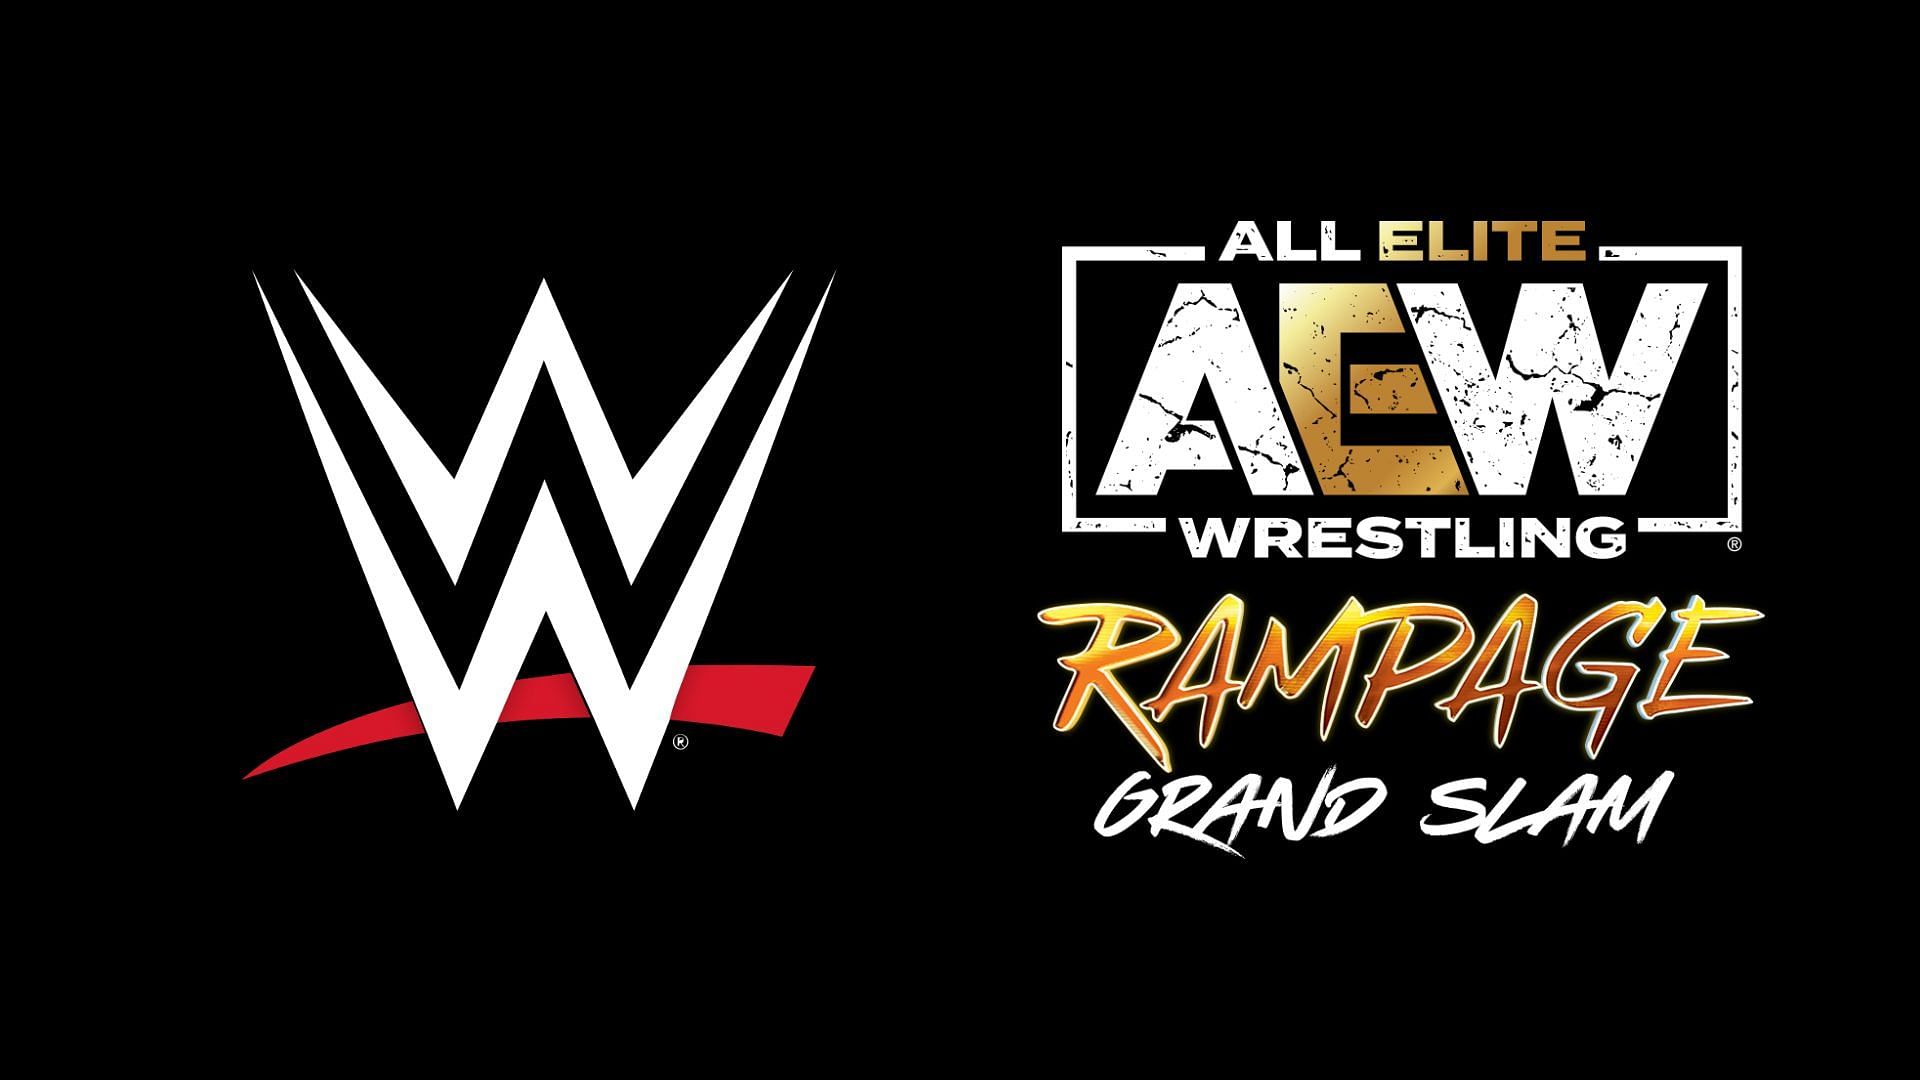 AEW Grand Slam is set for Dynamite and Rampage next week